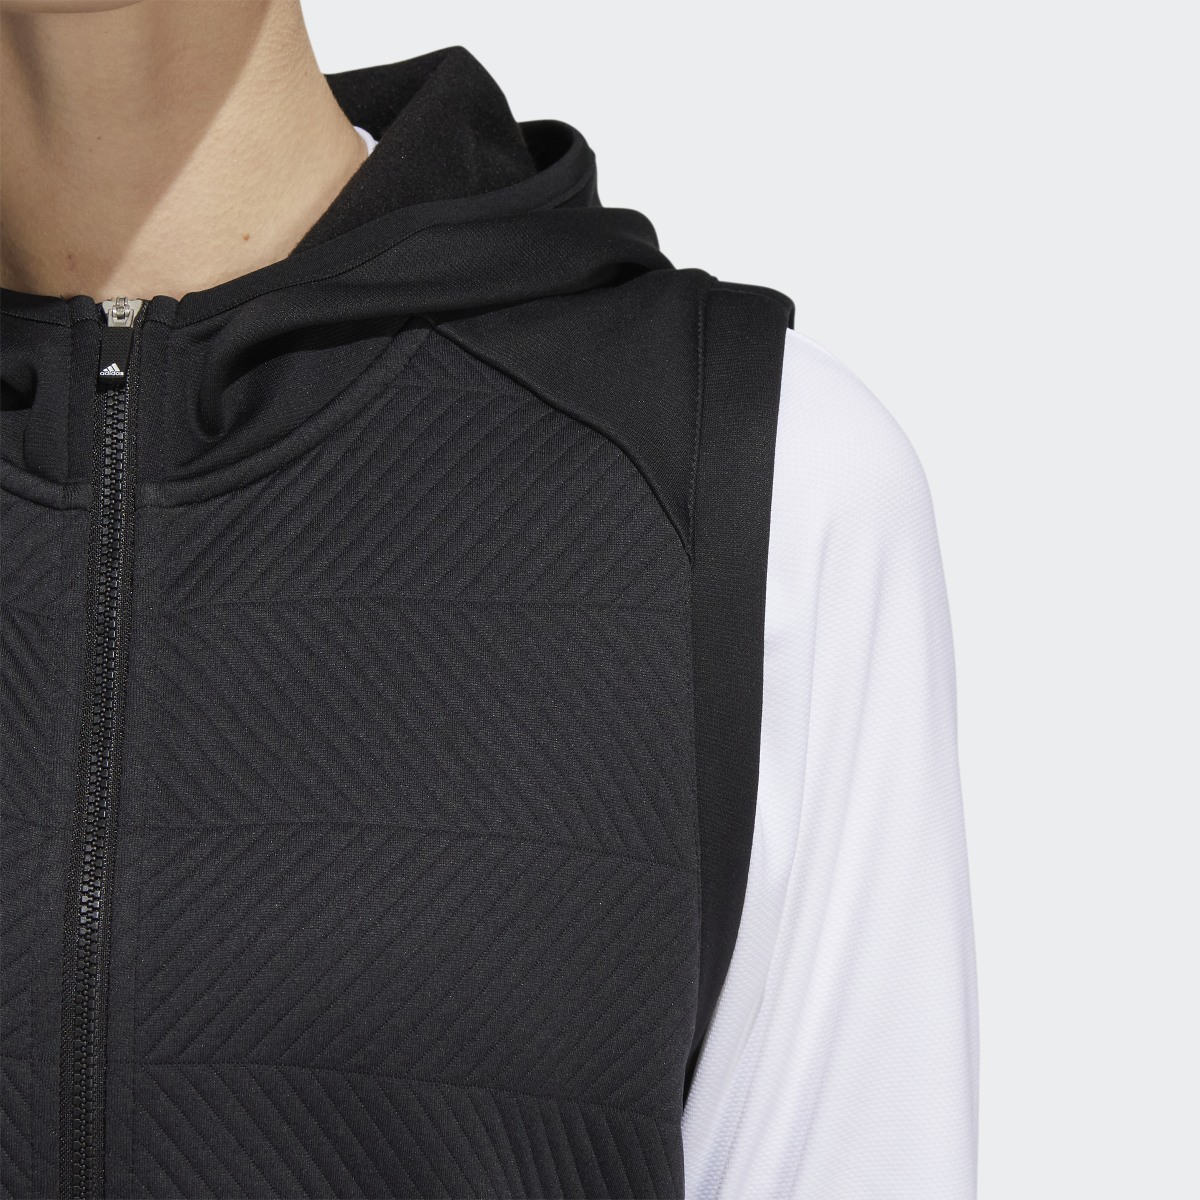 Adidas COLD.RDY Full-Zip Vest. 8